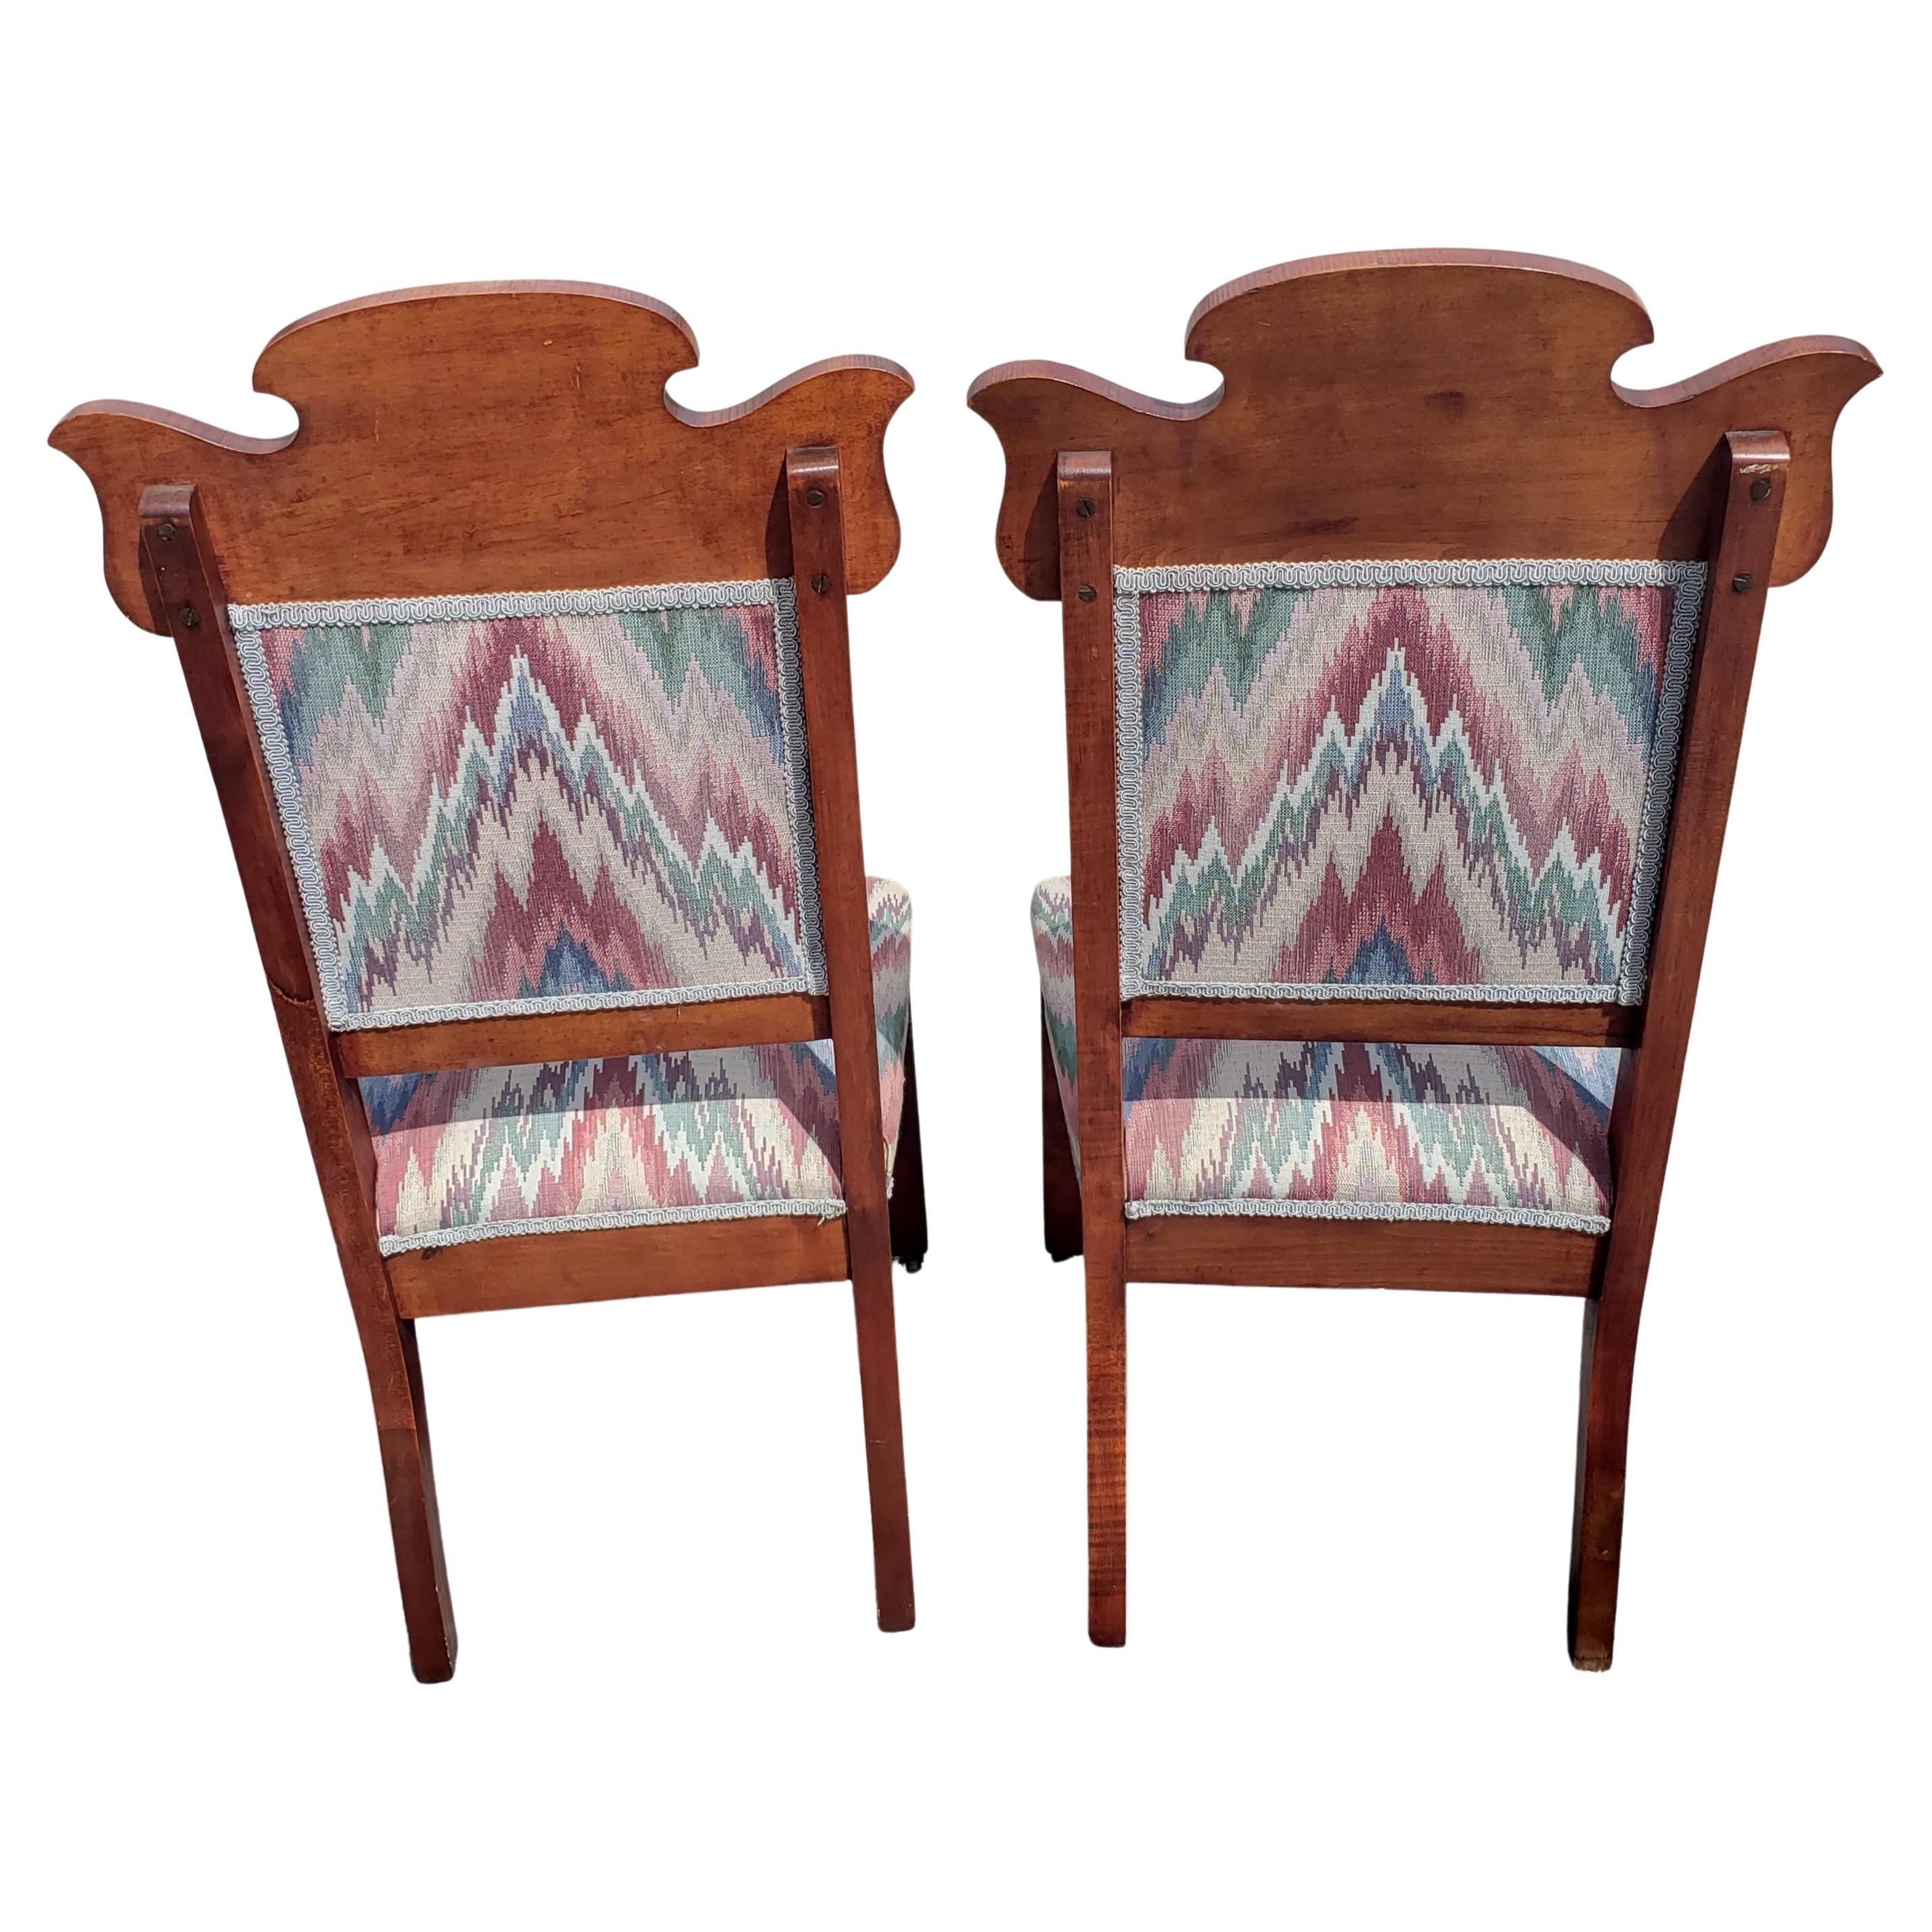 Edwardian Eastlake Carved Mahogany Upholstered Chairs, circa 1920s, a Pair  In Good Condition For Sale In Germantown, MD